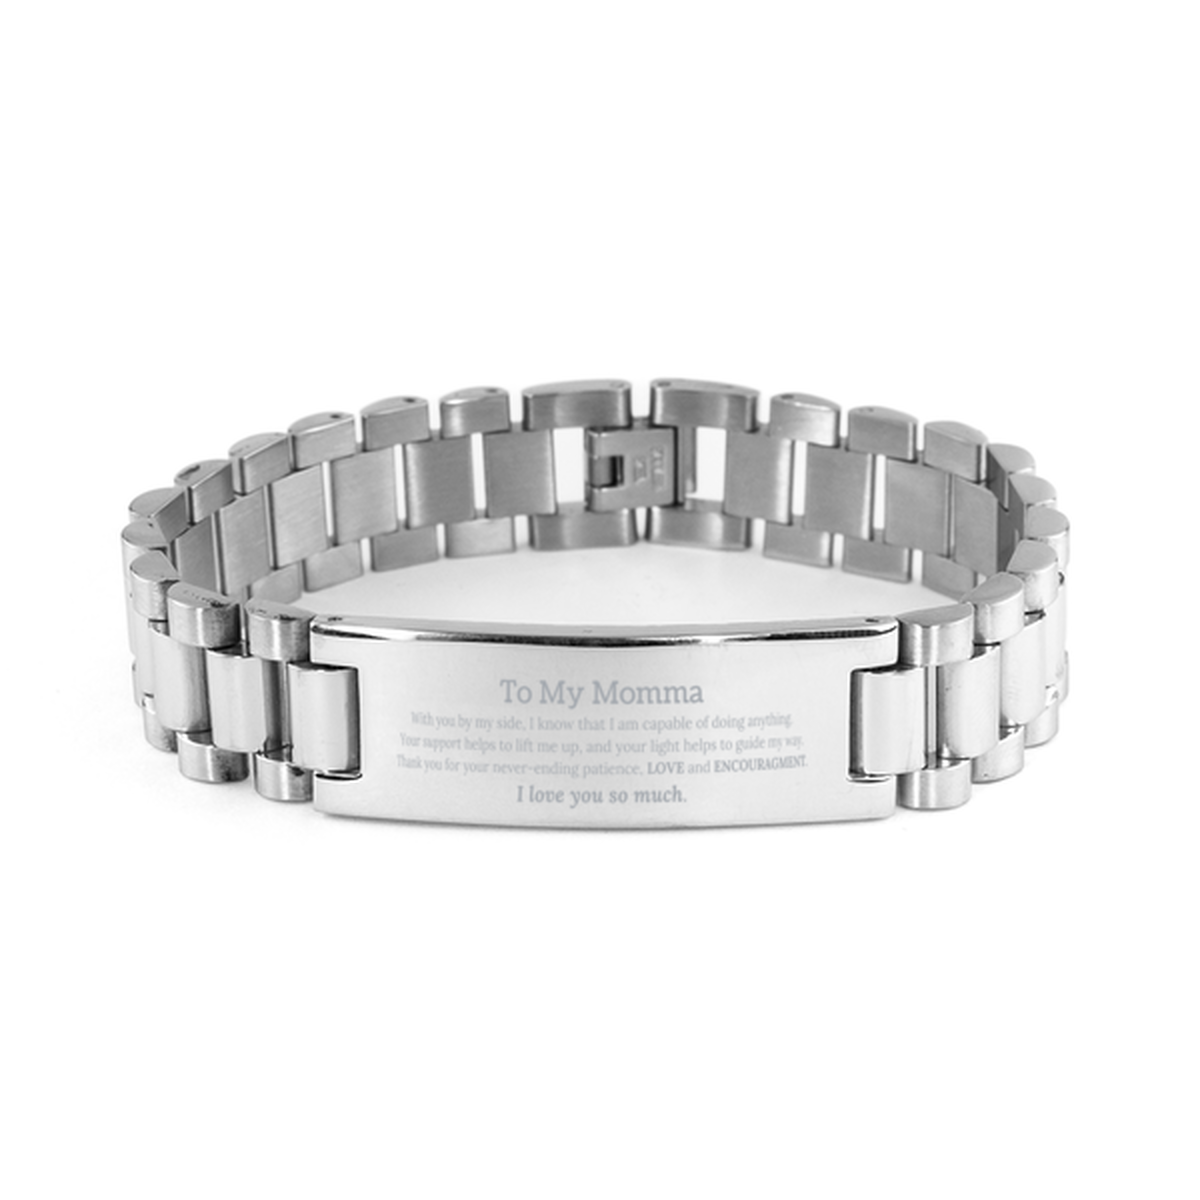 Appreciation Momma Ladder Stainless Steel Bracelet Gifts, To My Momma Birthday Christmas Wedding Keepsake Gifts for Momma With you by my side, I know that I am capable of doing anything. I love you so much